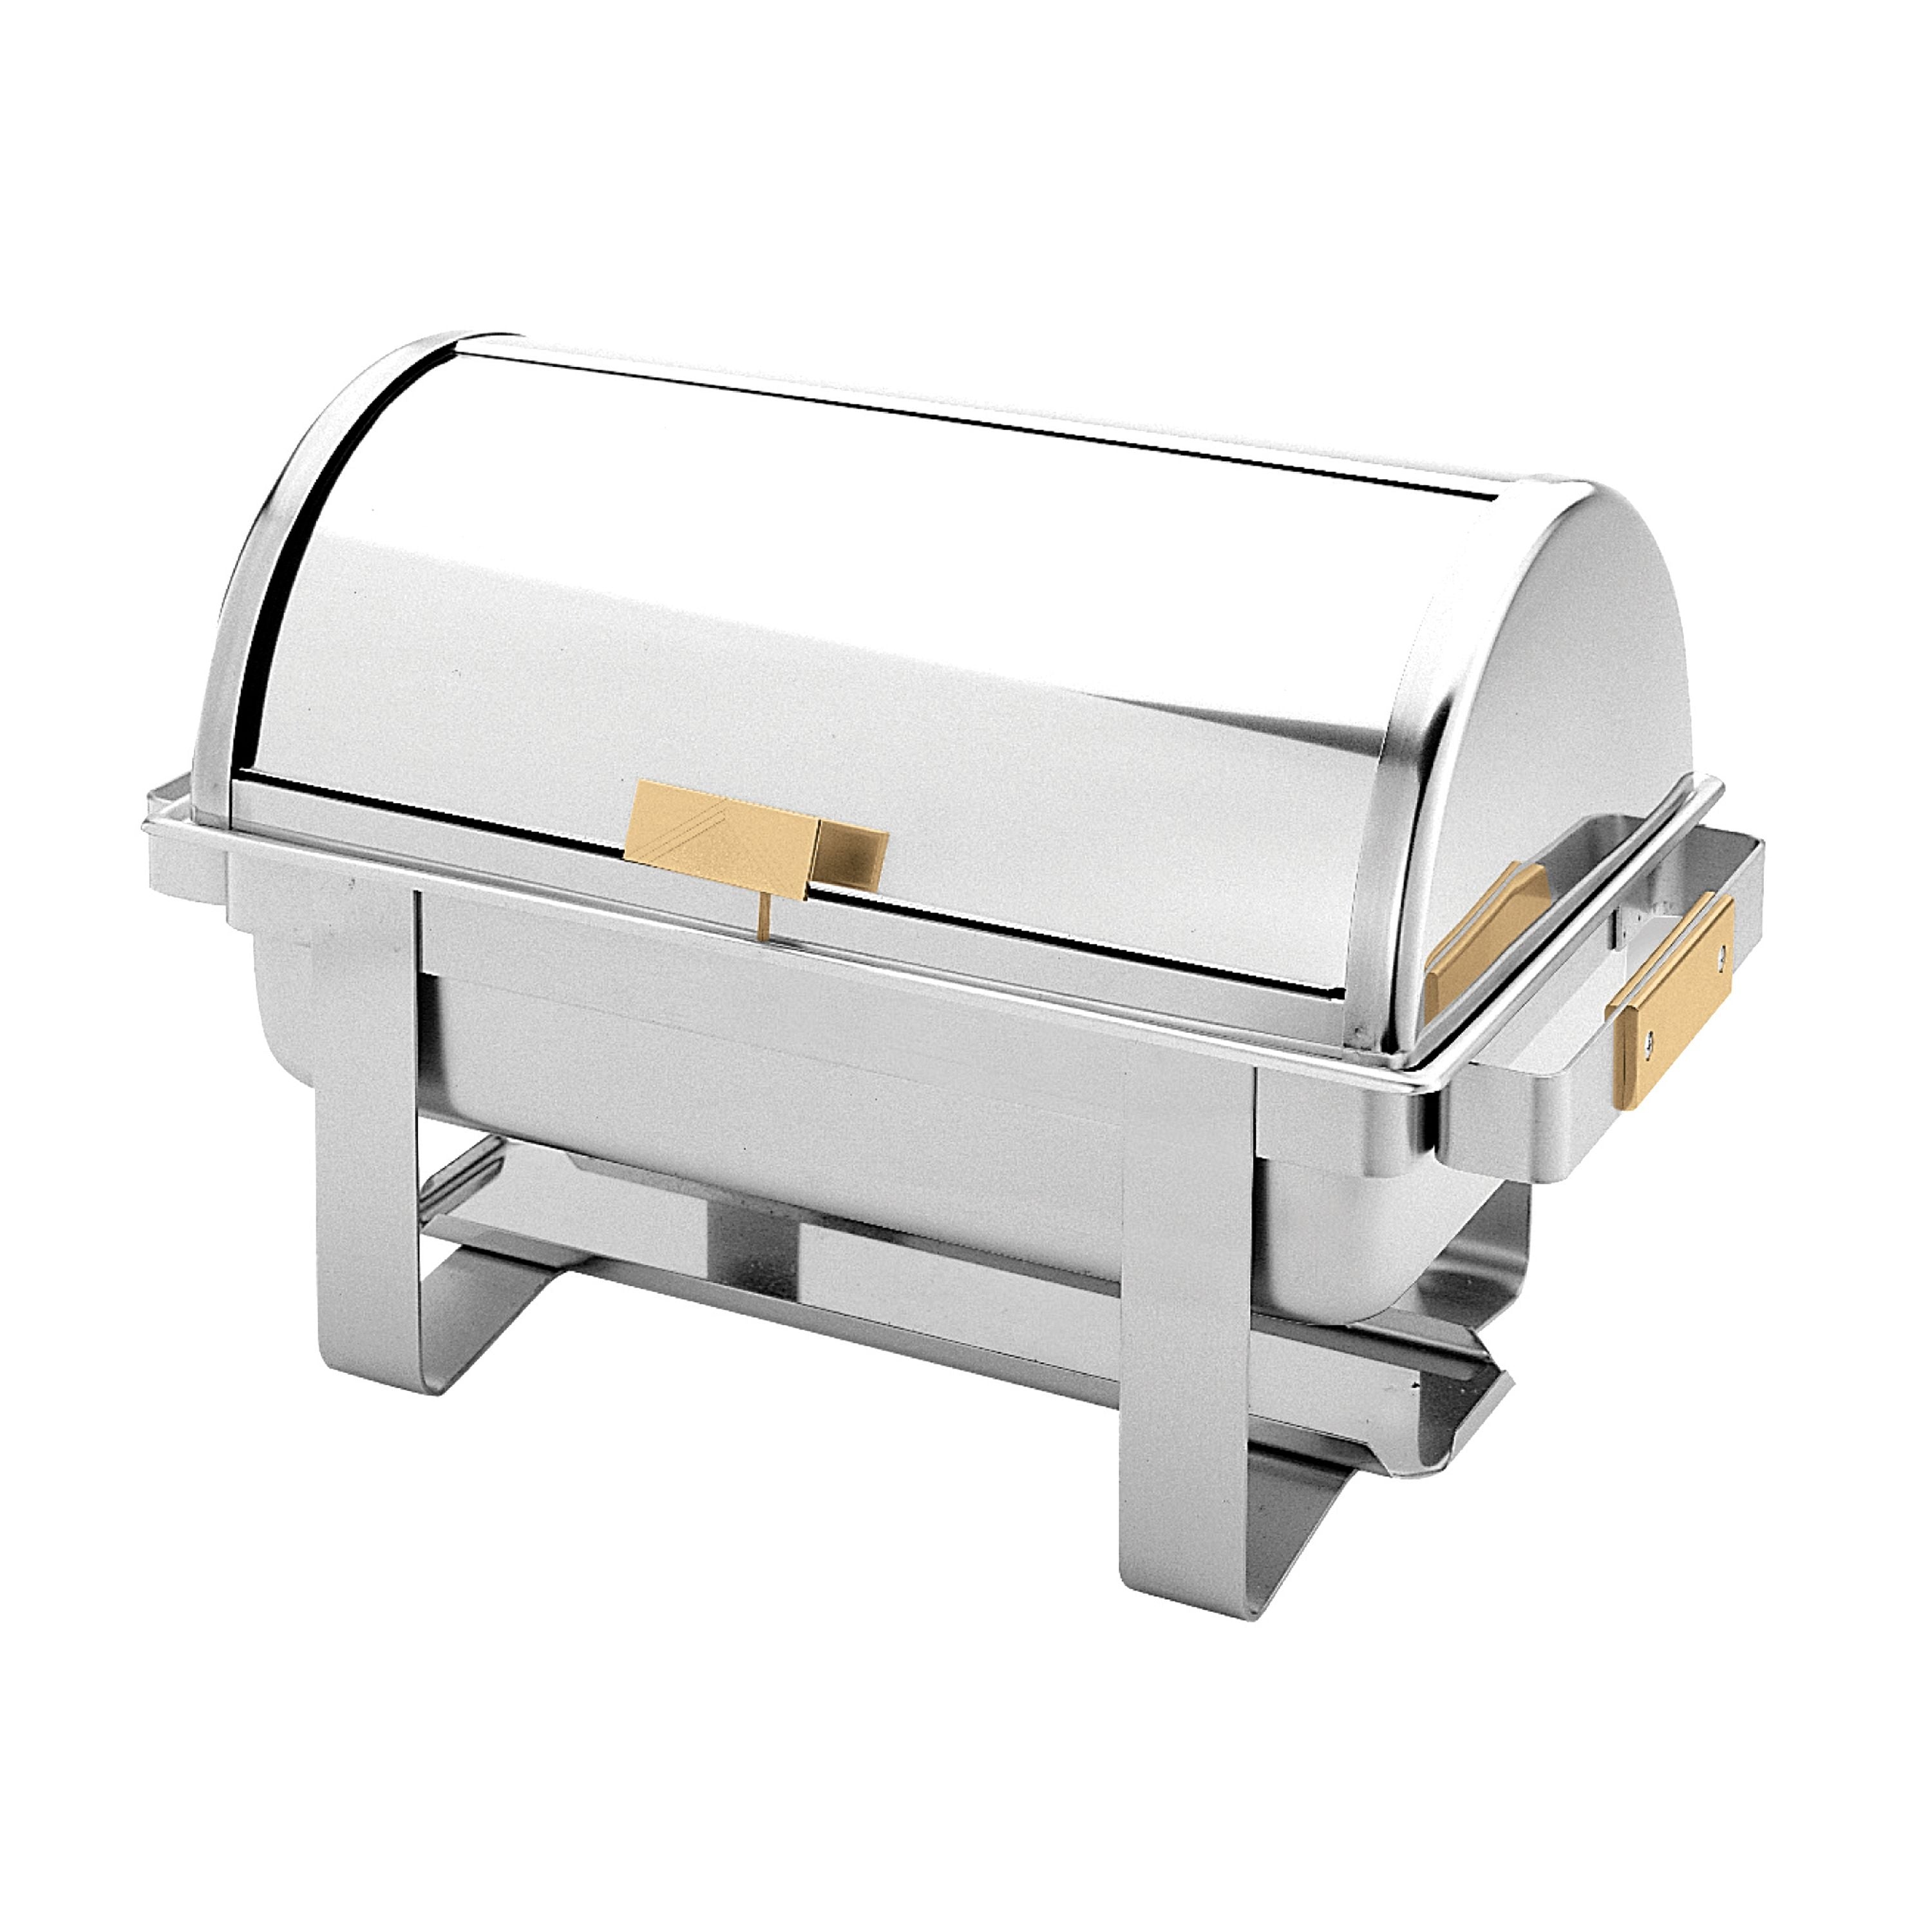 Thunder Group SLRCF0171G Stainless Steel Roll Top Chafer with Gold Accented Handles